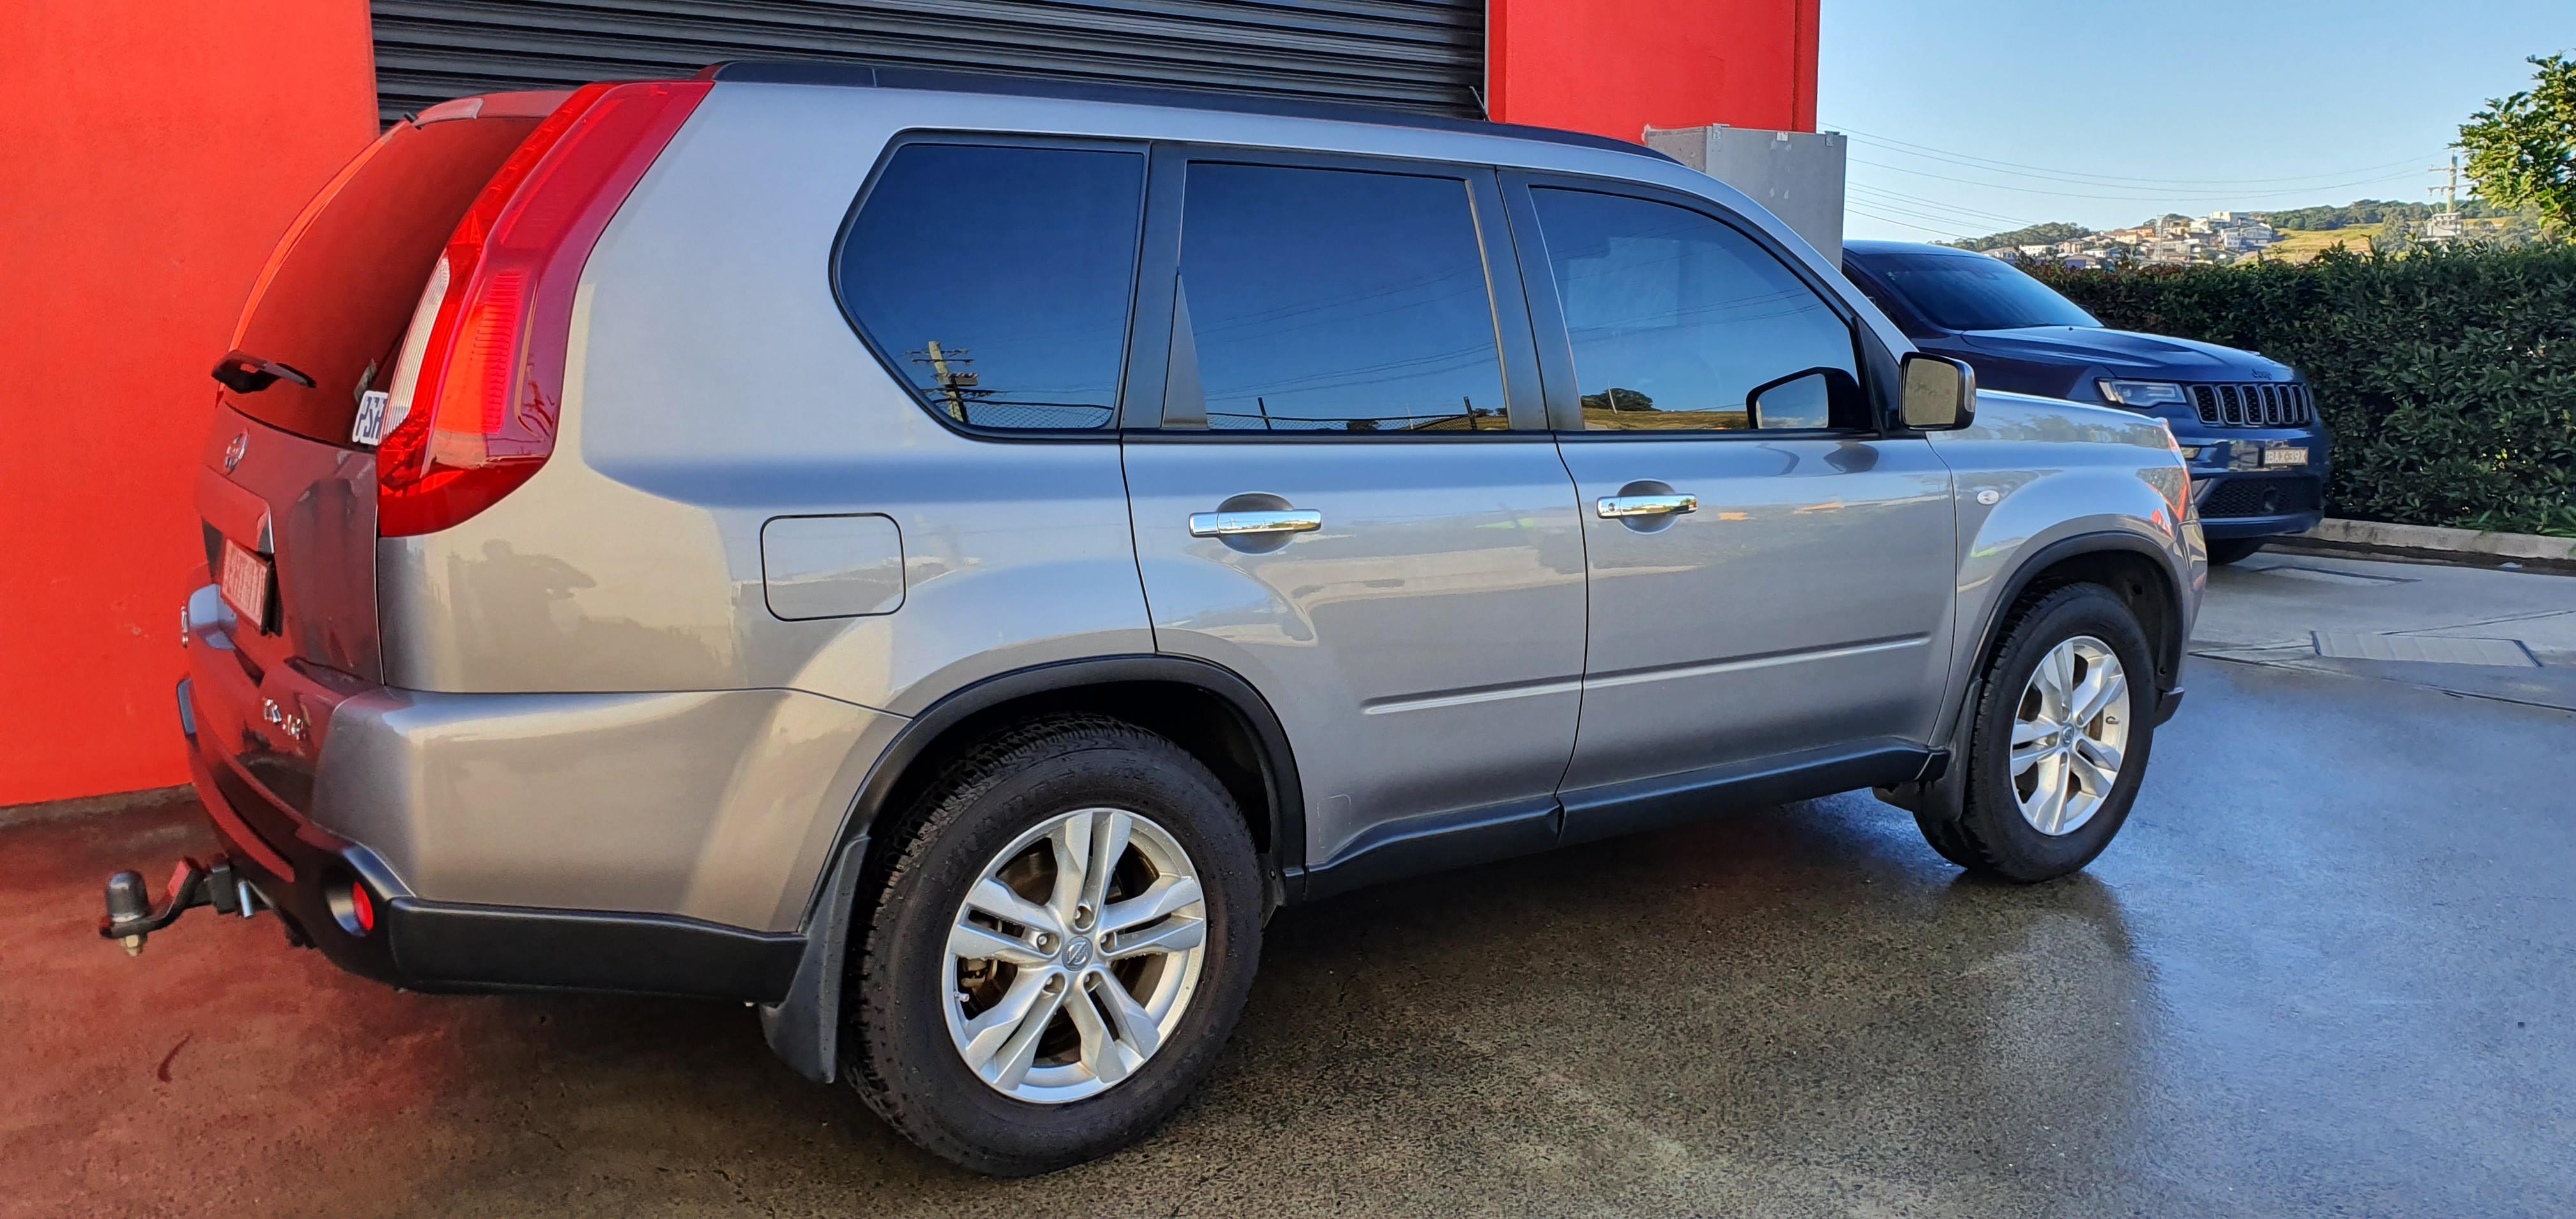 Images Albion Park Window Tinting